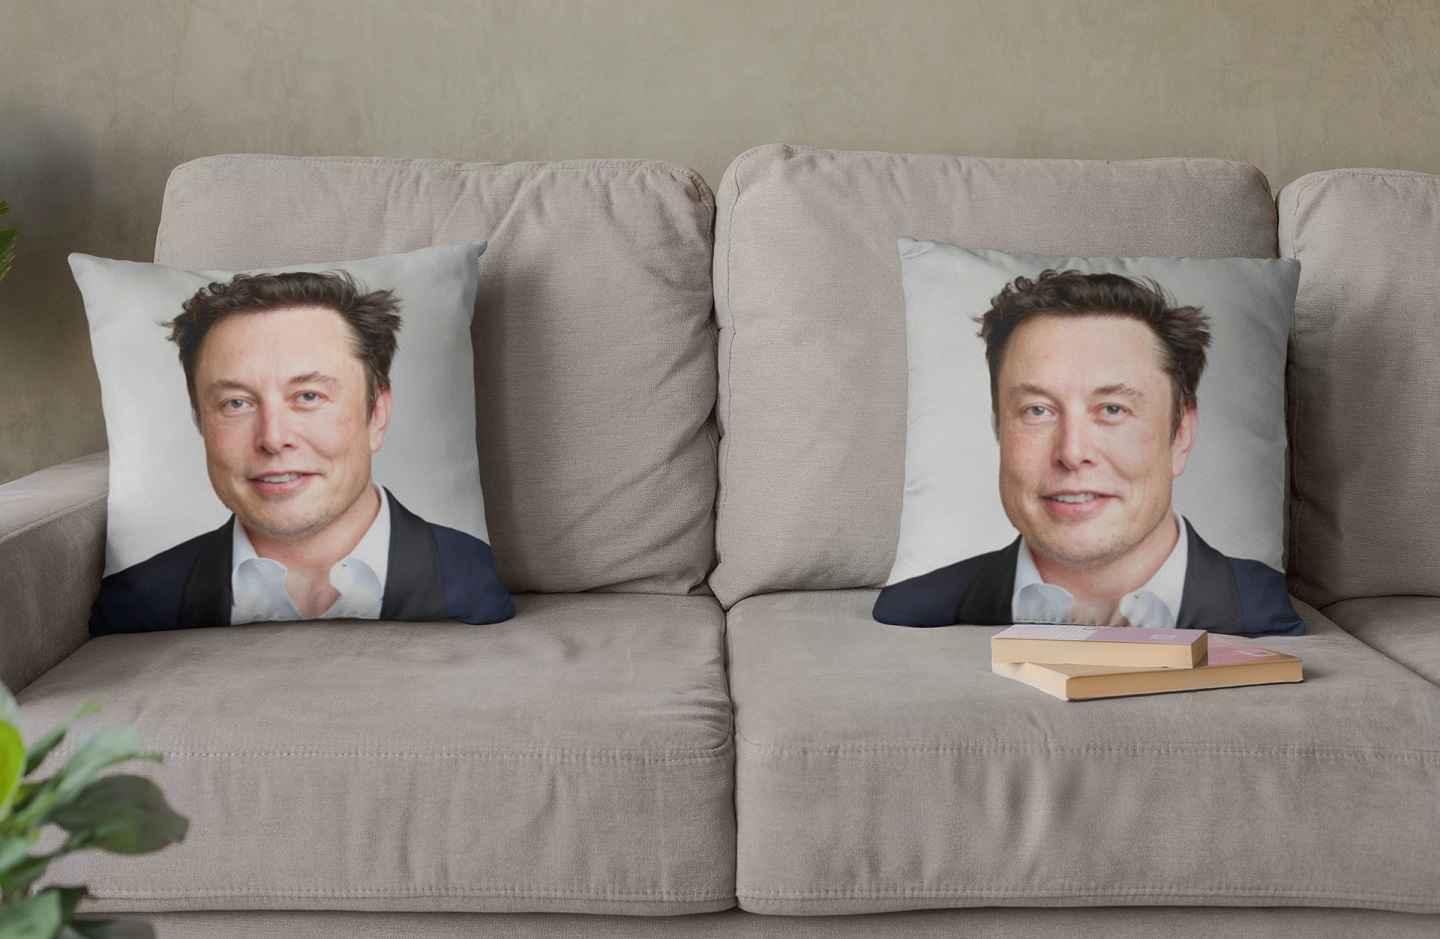 Two Elon Musk pillows positioned at opposite ends of a sofa.